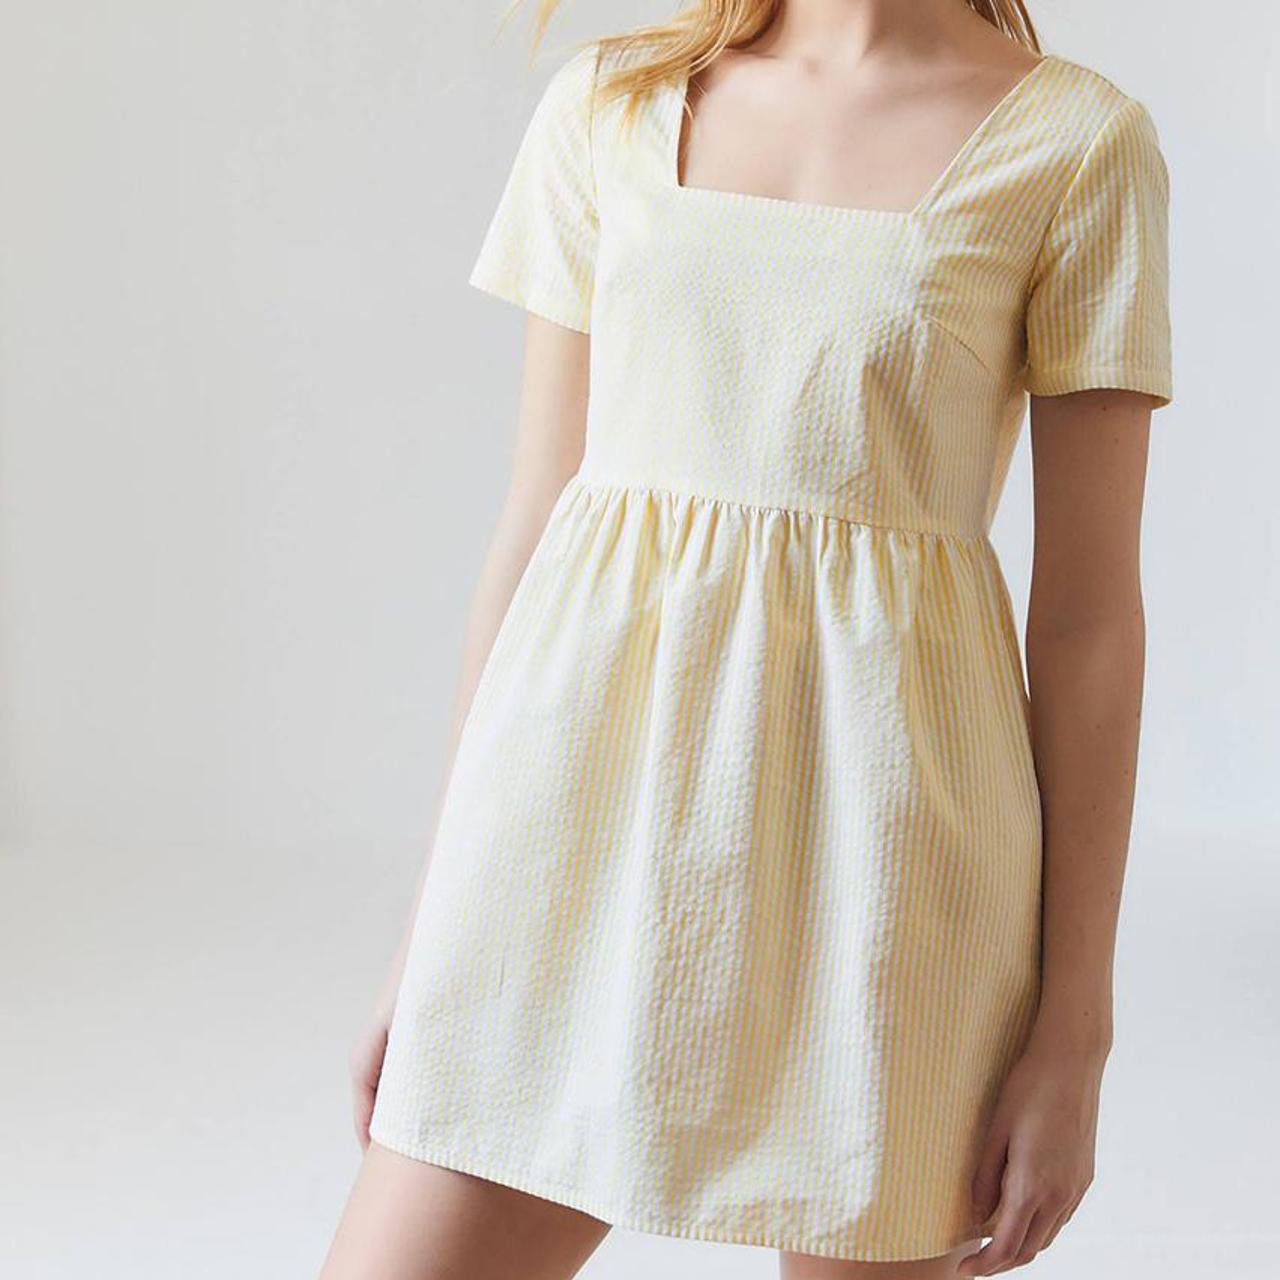 Urban Outfitters Women's White and Yellow Dress